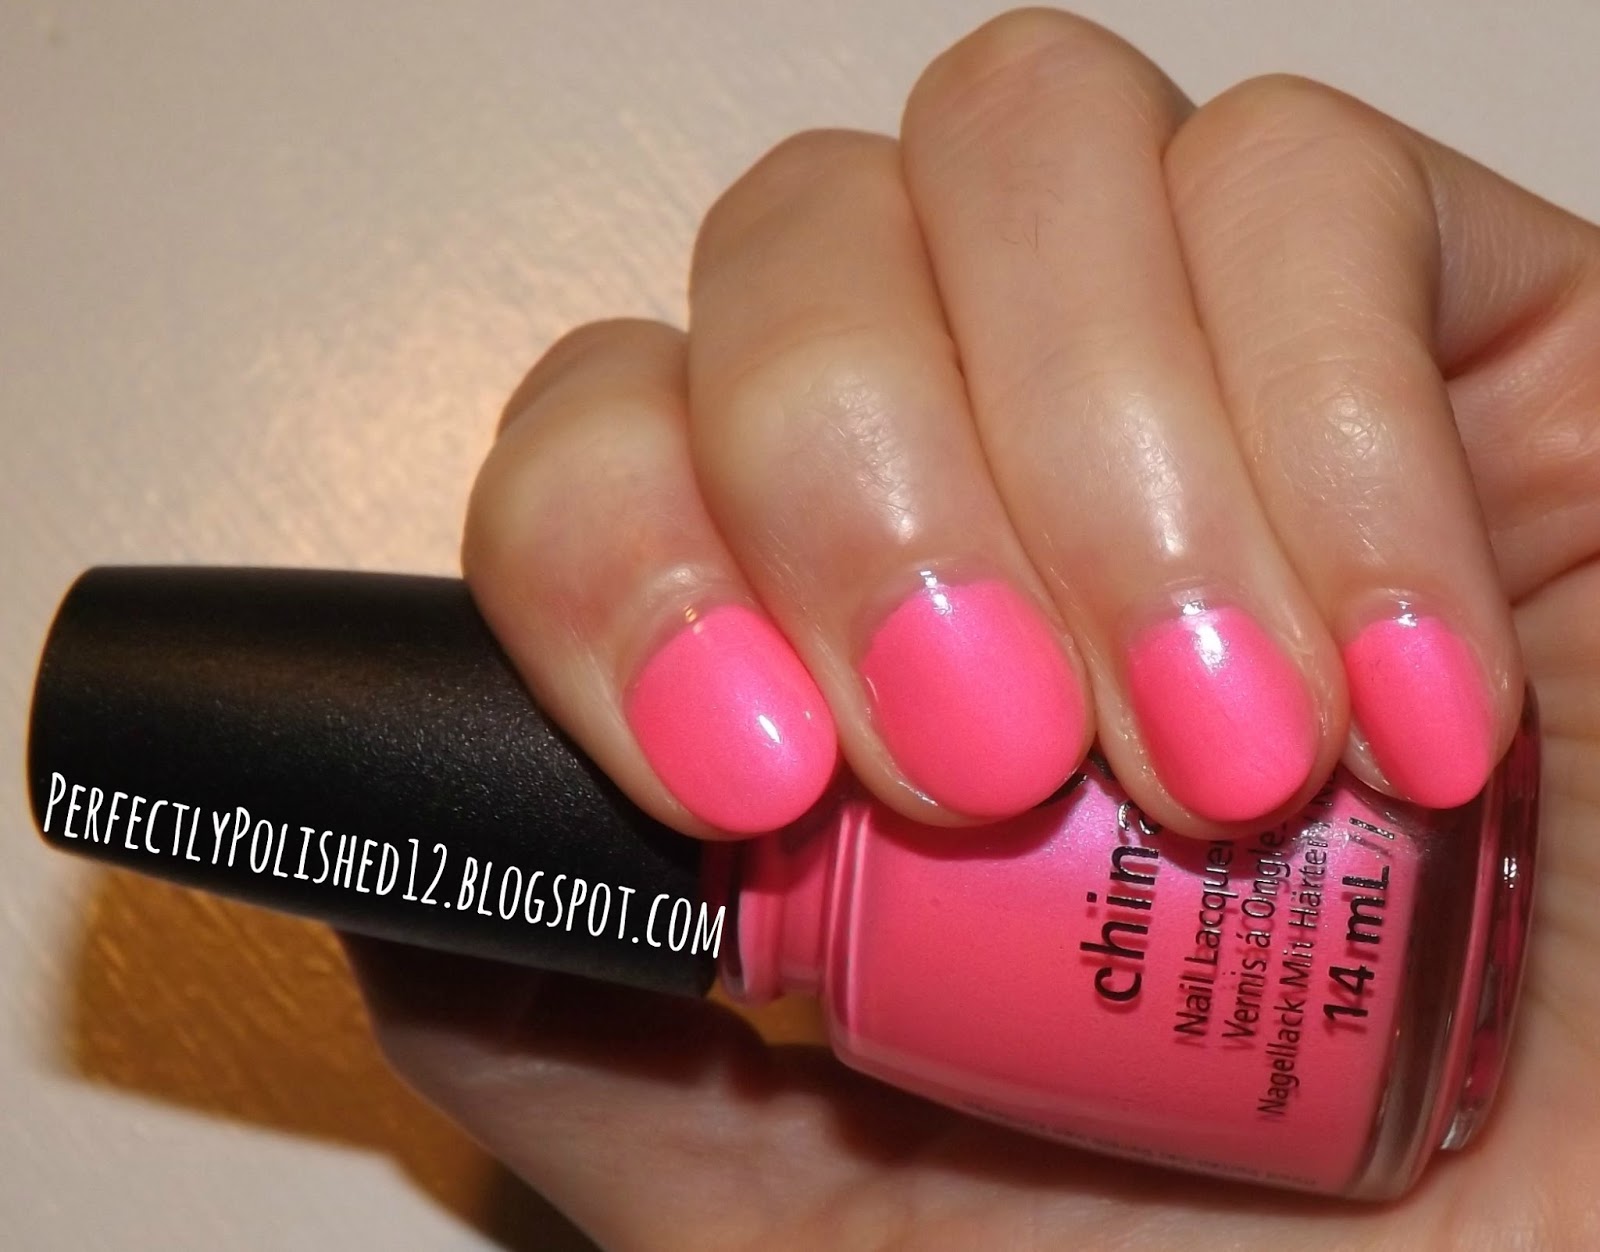 China Glaze Nail Lacquer in "Pink Voltage" - wide 5